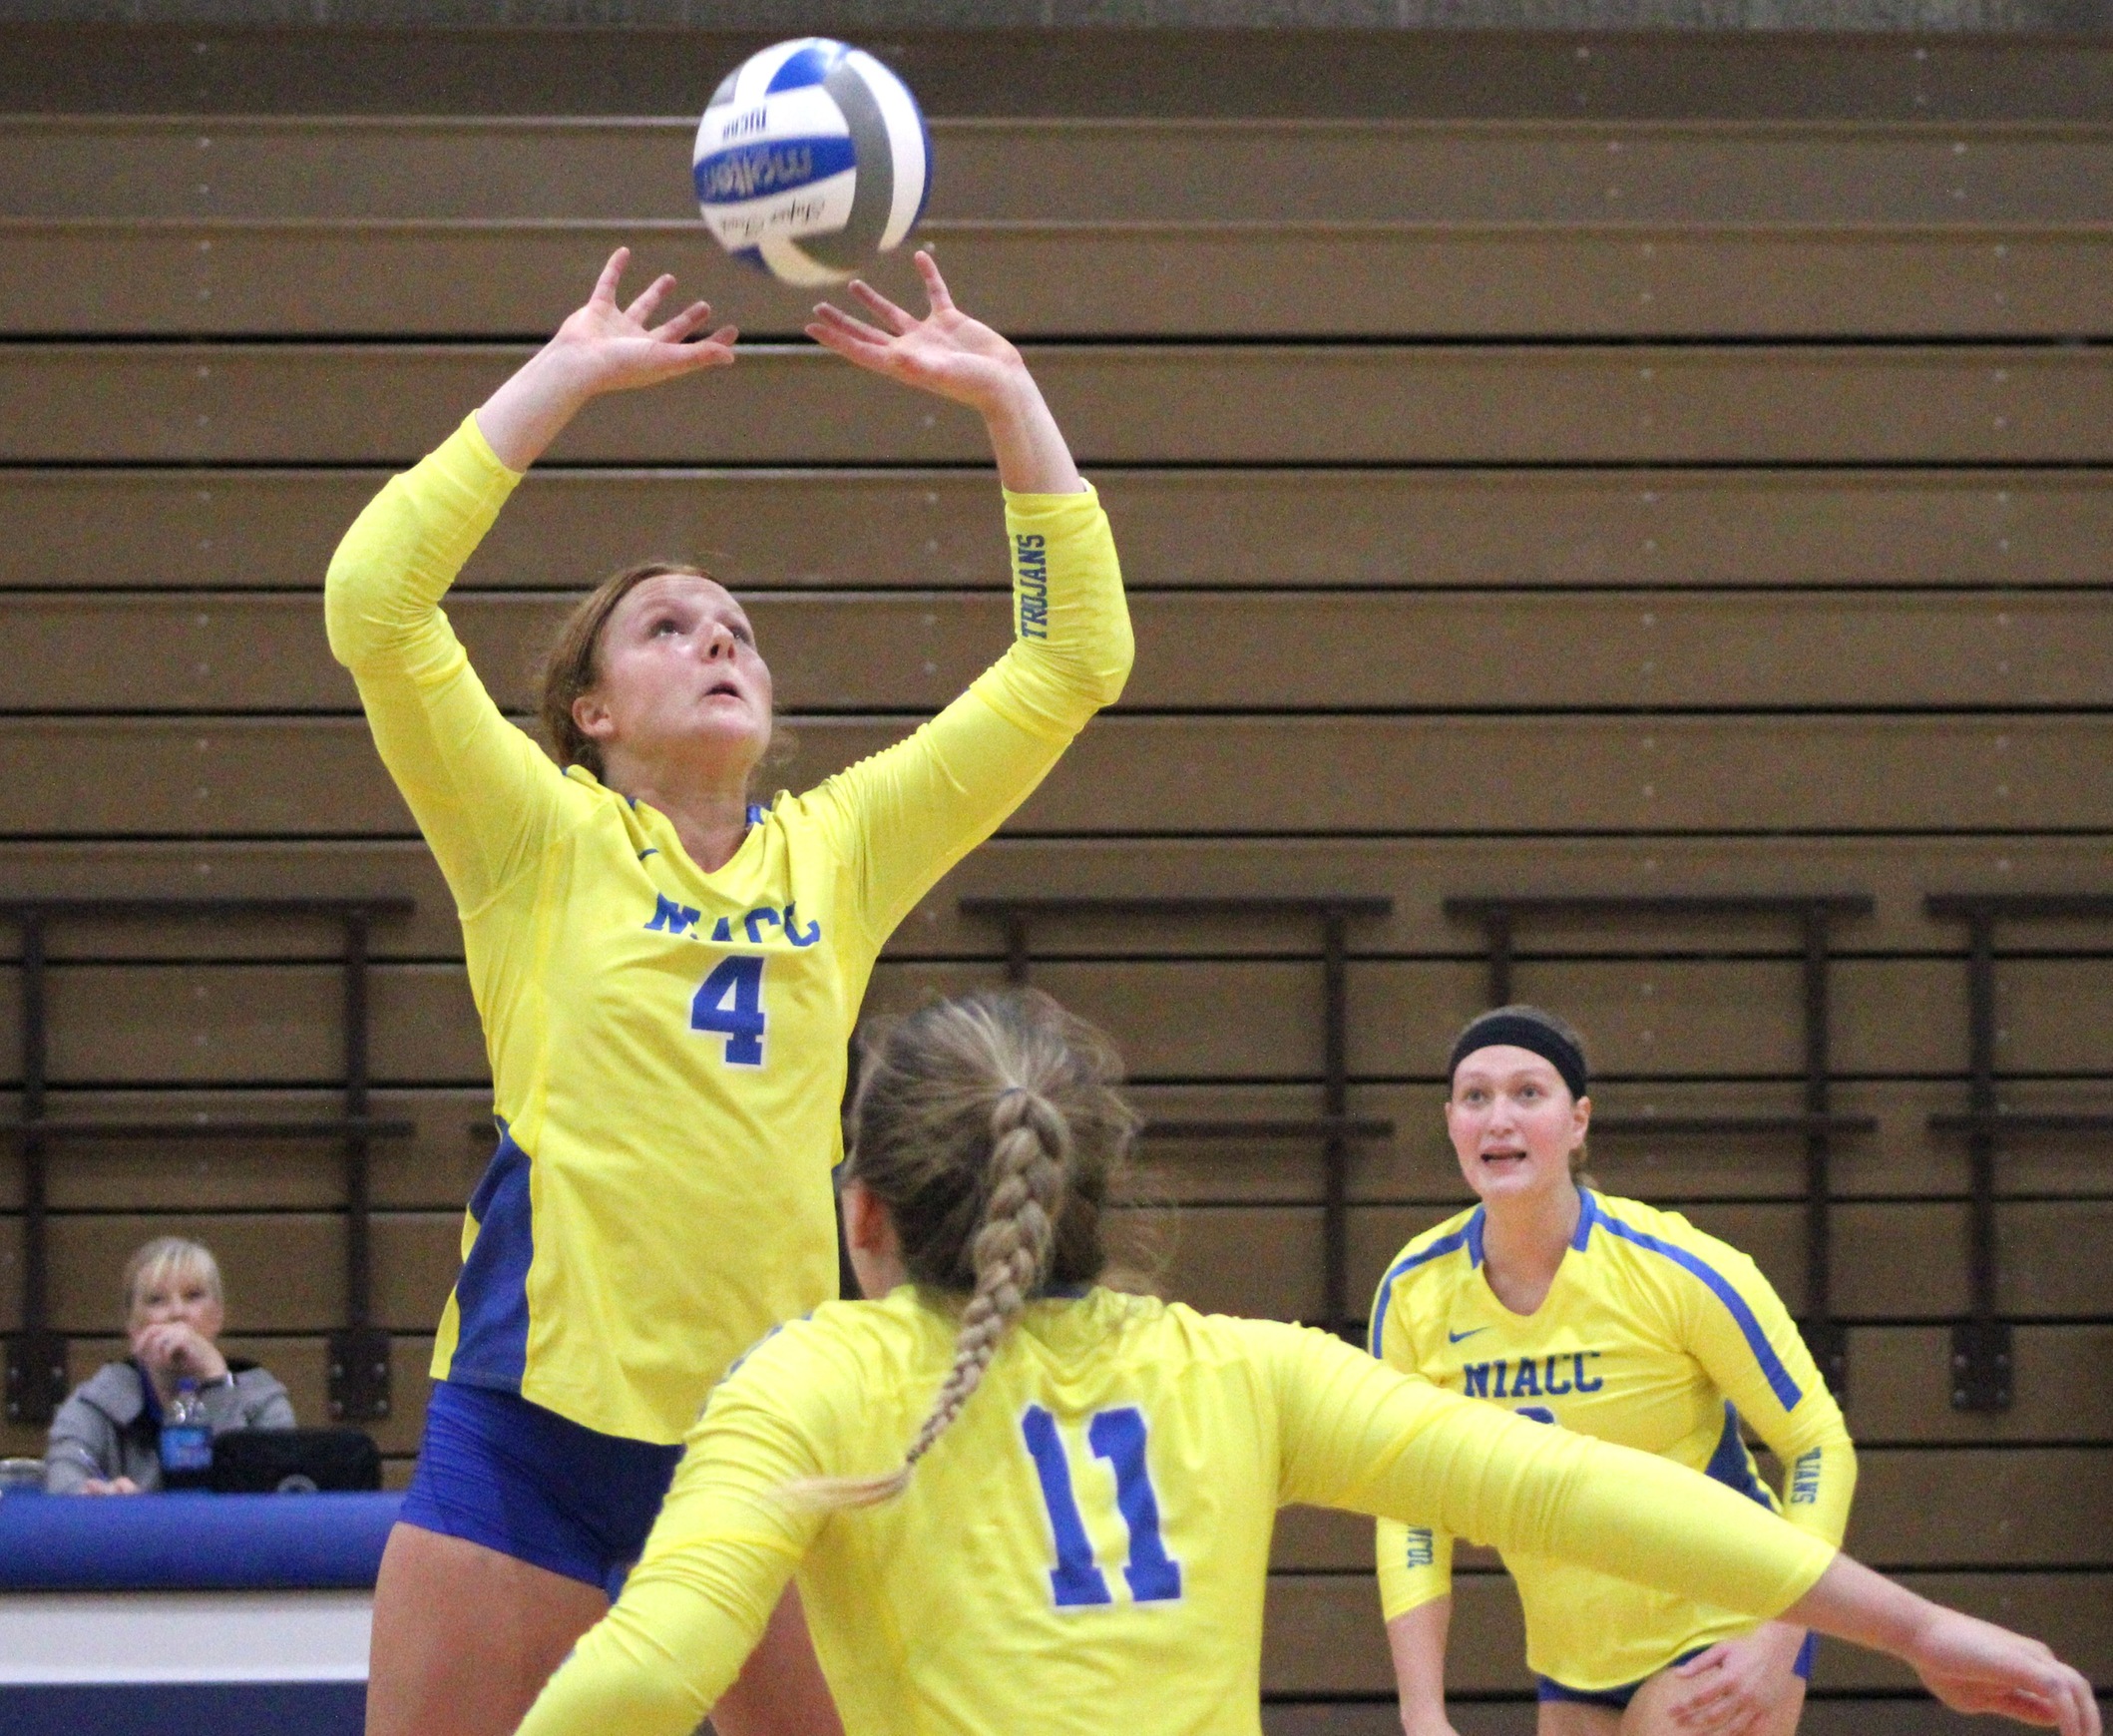 NIACC's Samantha Coron sets the ball during last week's home match against Southwestern.